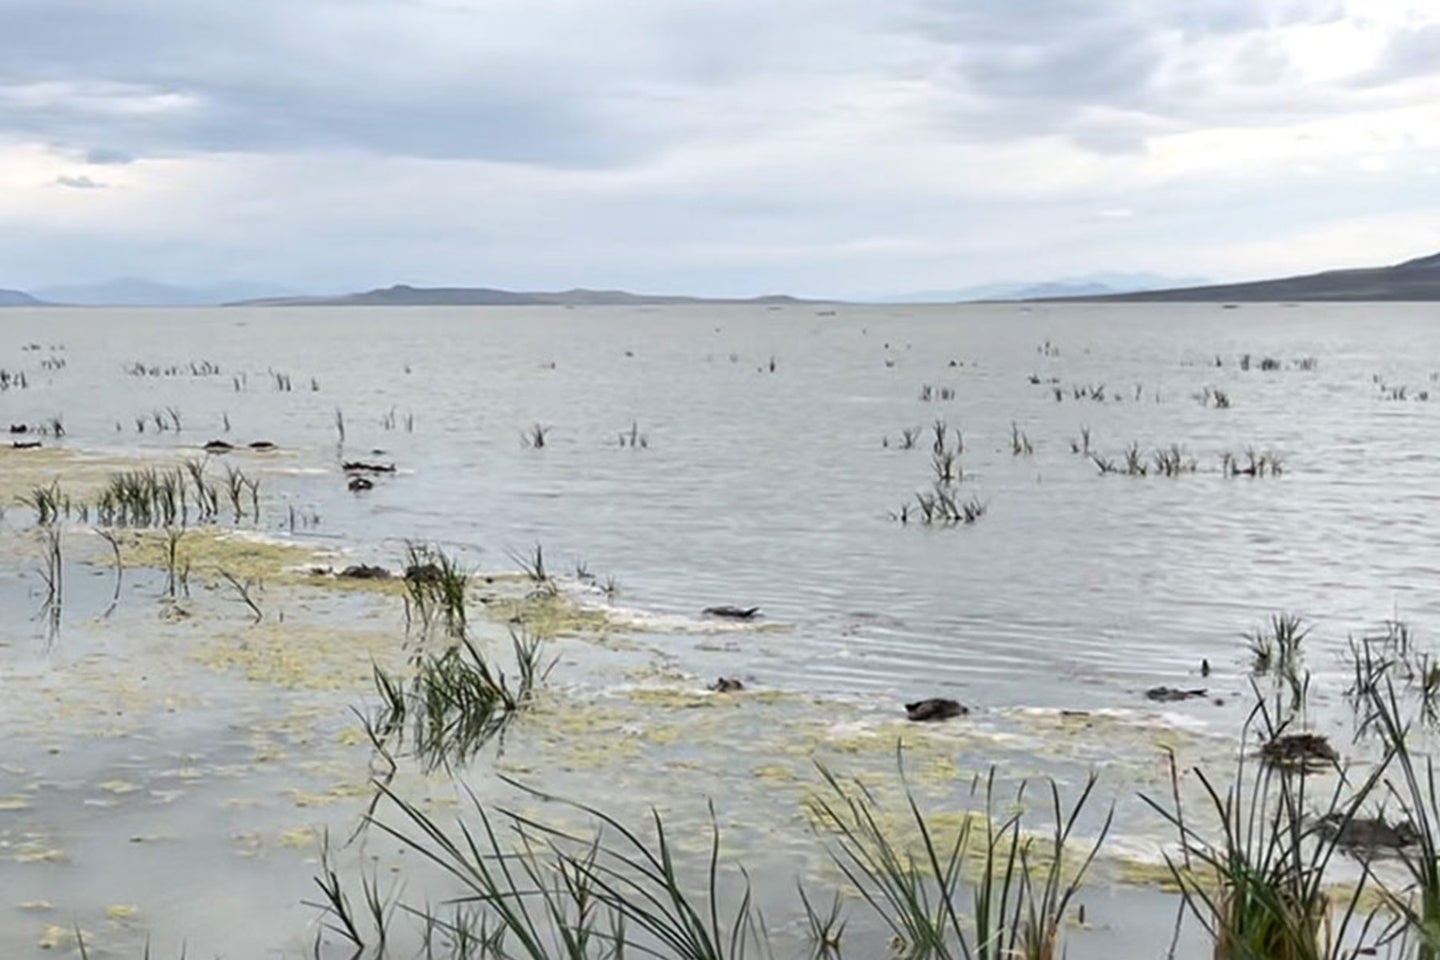 Most of the dead birds were found at migratory bird refuges in the Bear River and Willard Bays. 